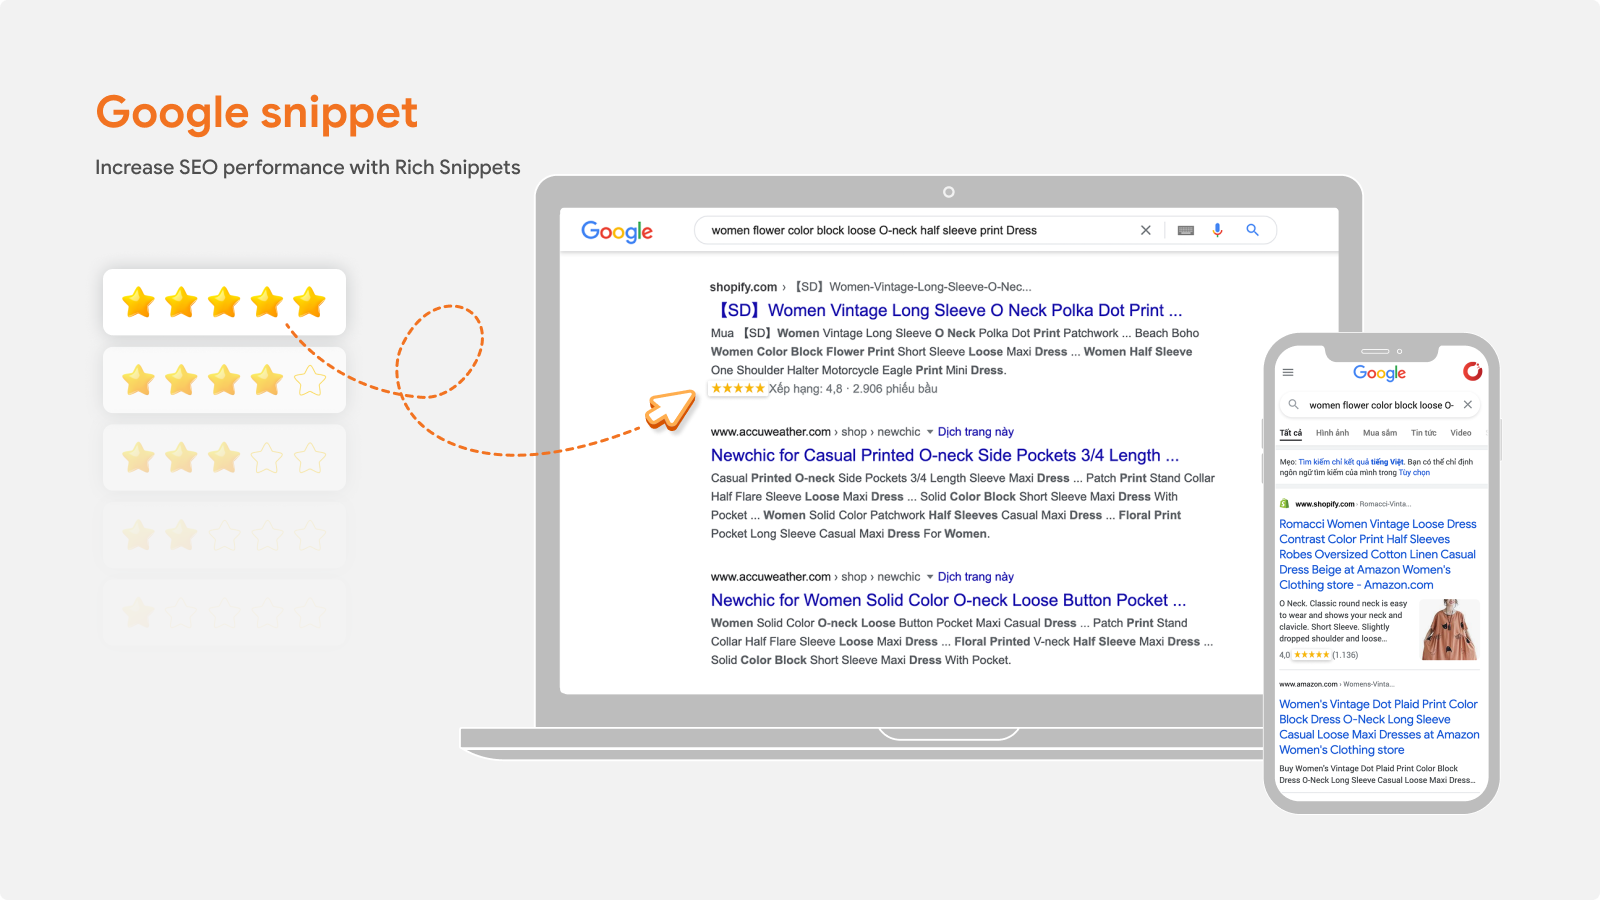 Product Reviews App For Google Snippet